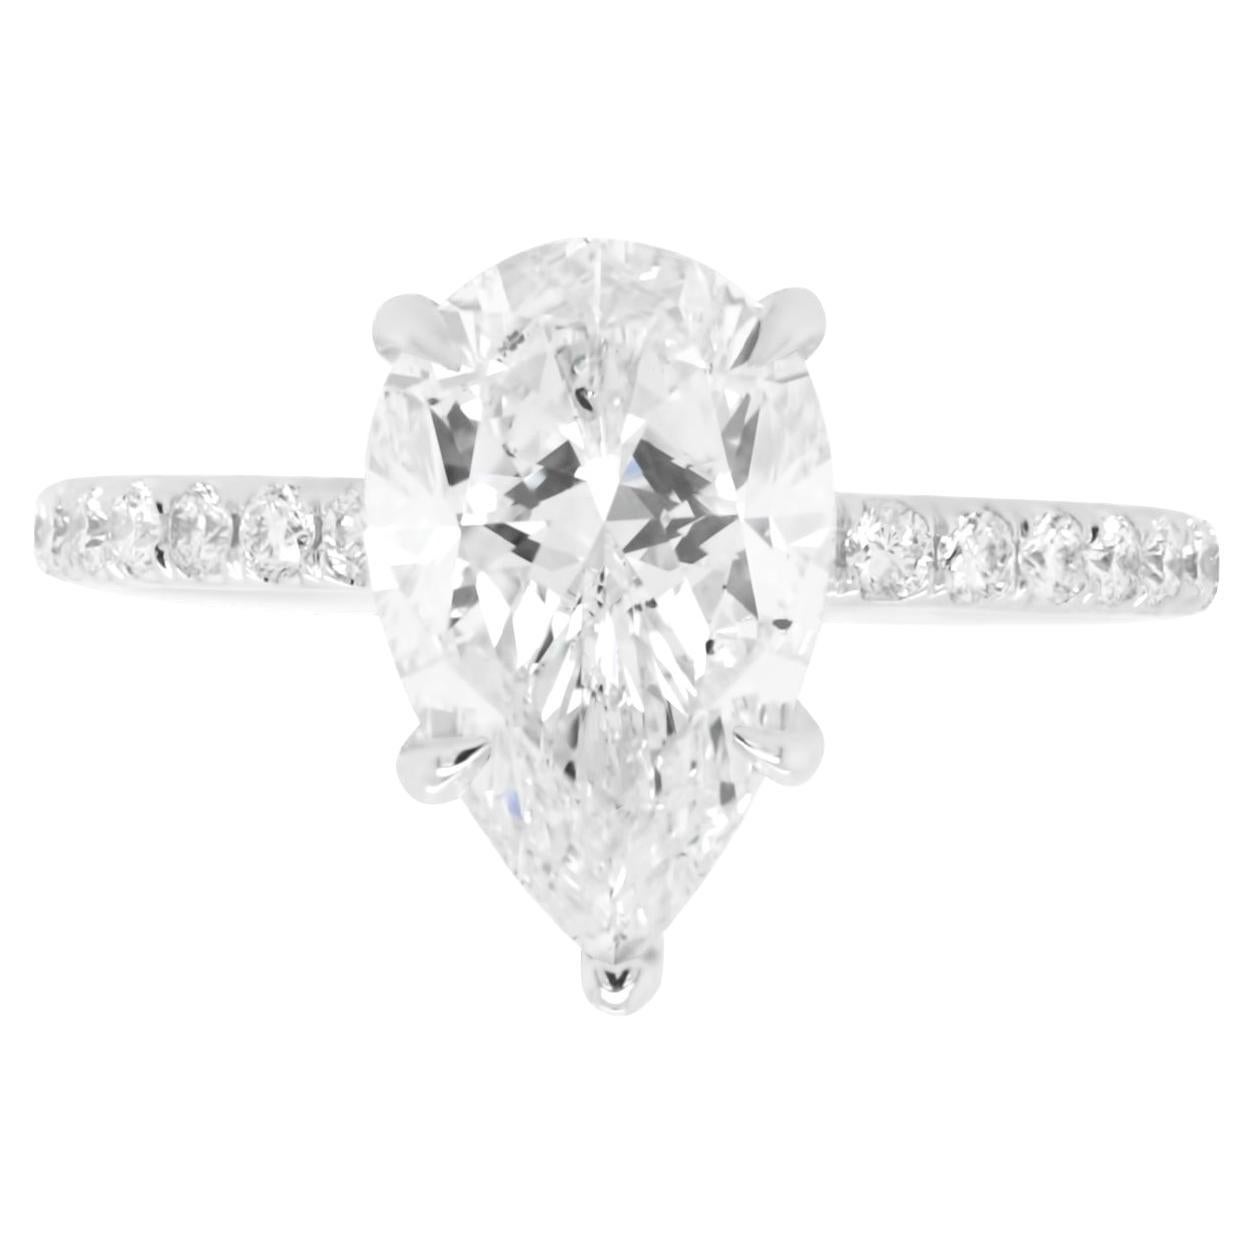 Stunning GIA Certified 3.01 Carat I-SI1 Pear Shape Engagement Ring